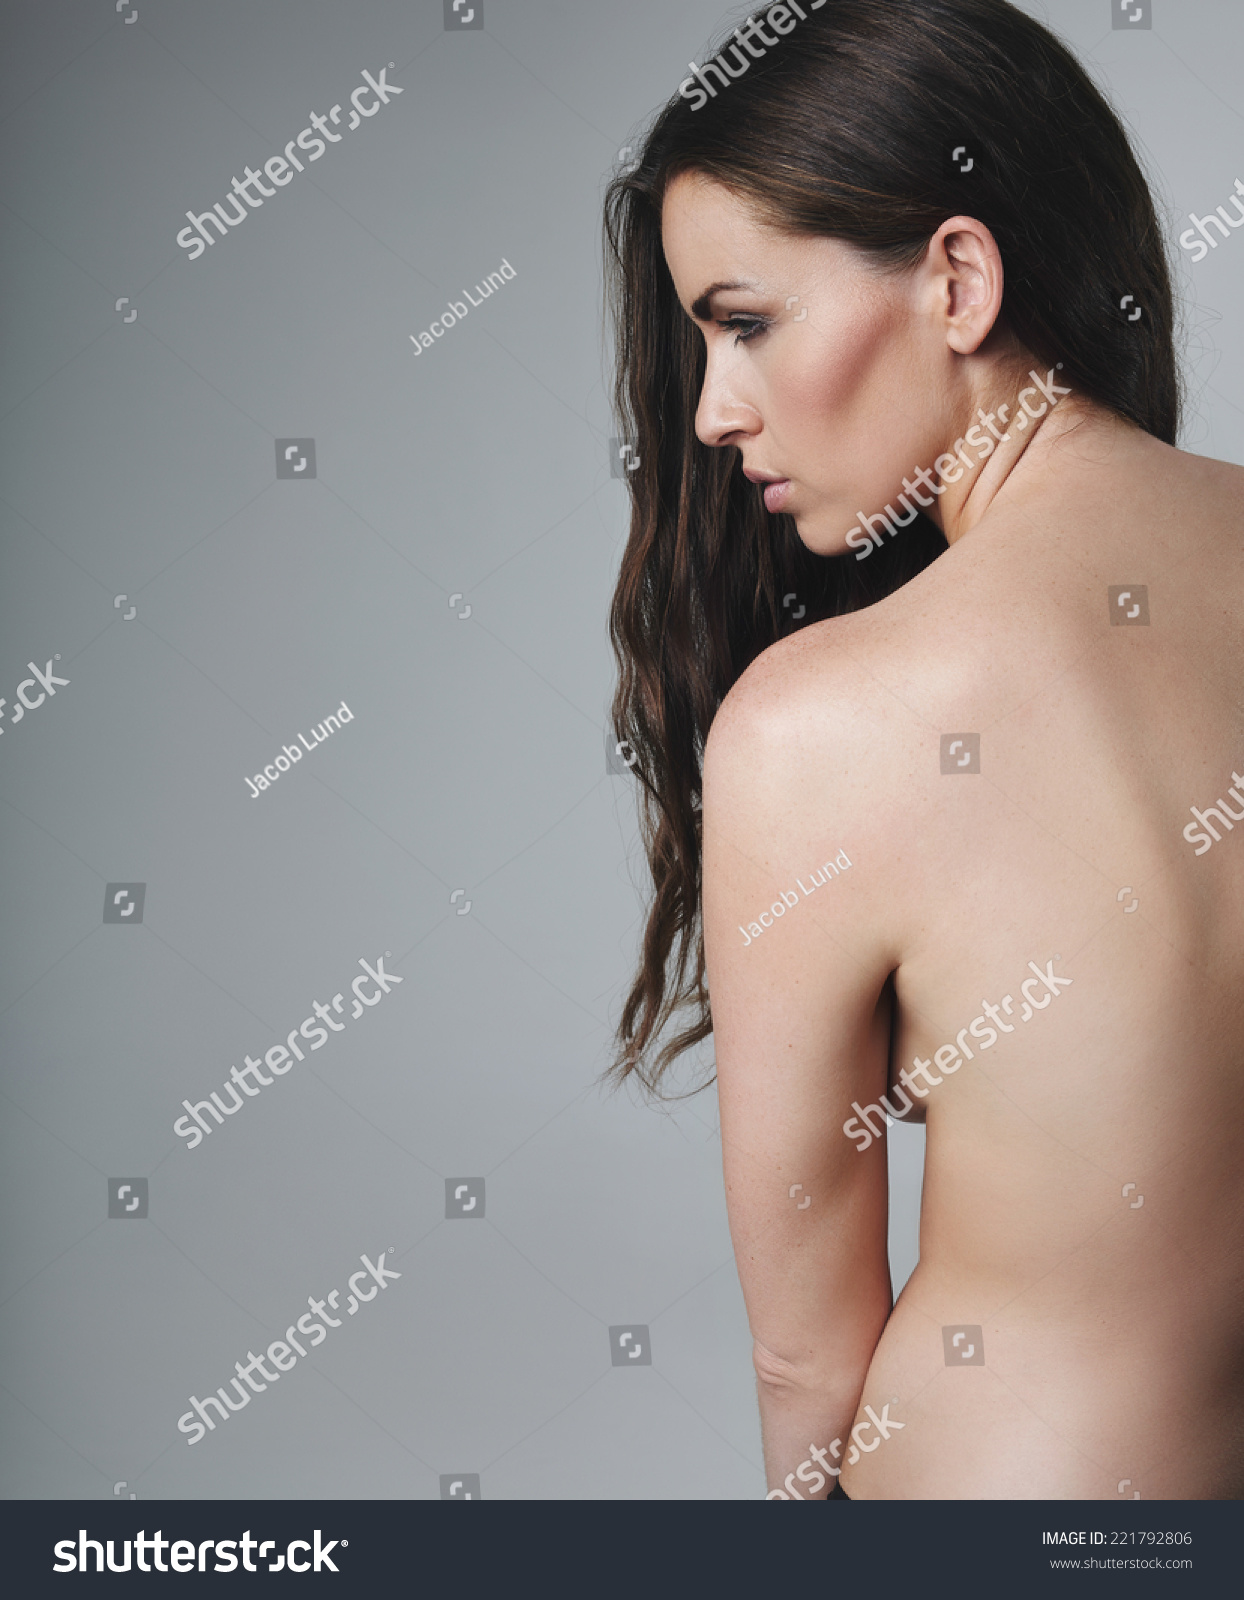 Topless women models-naked photo